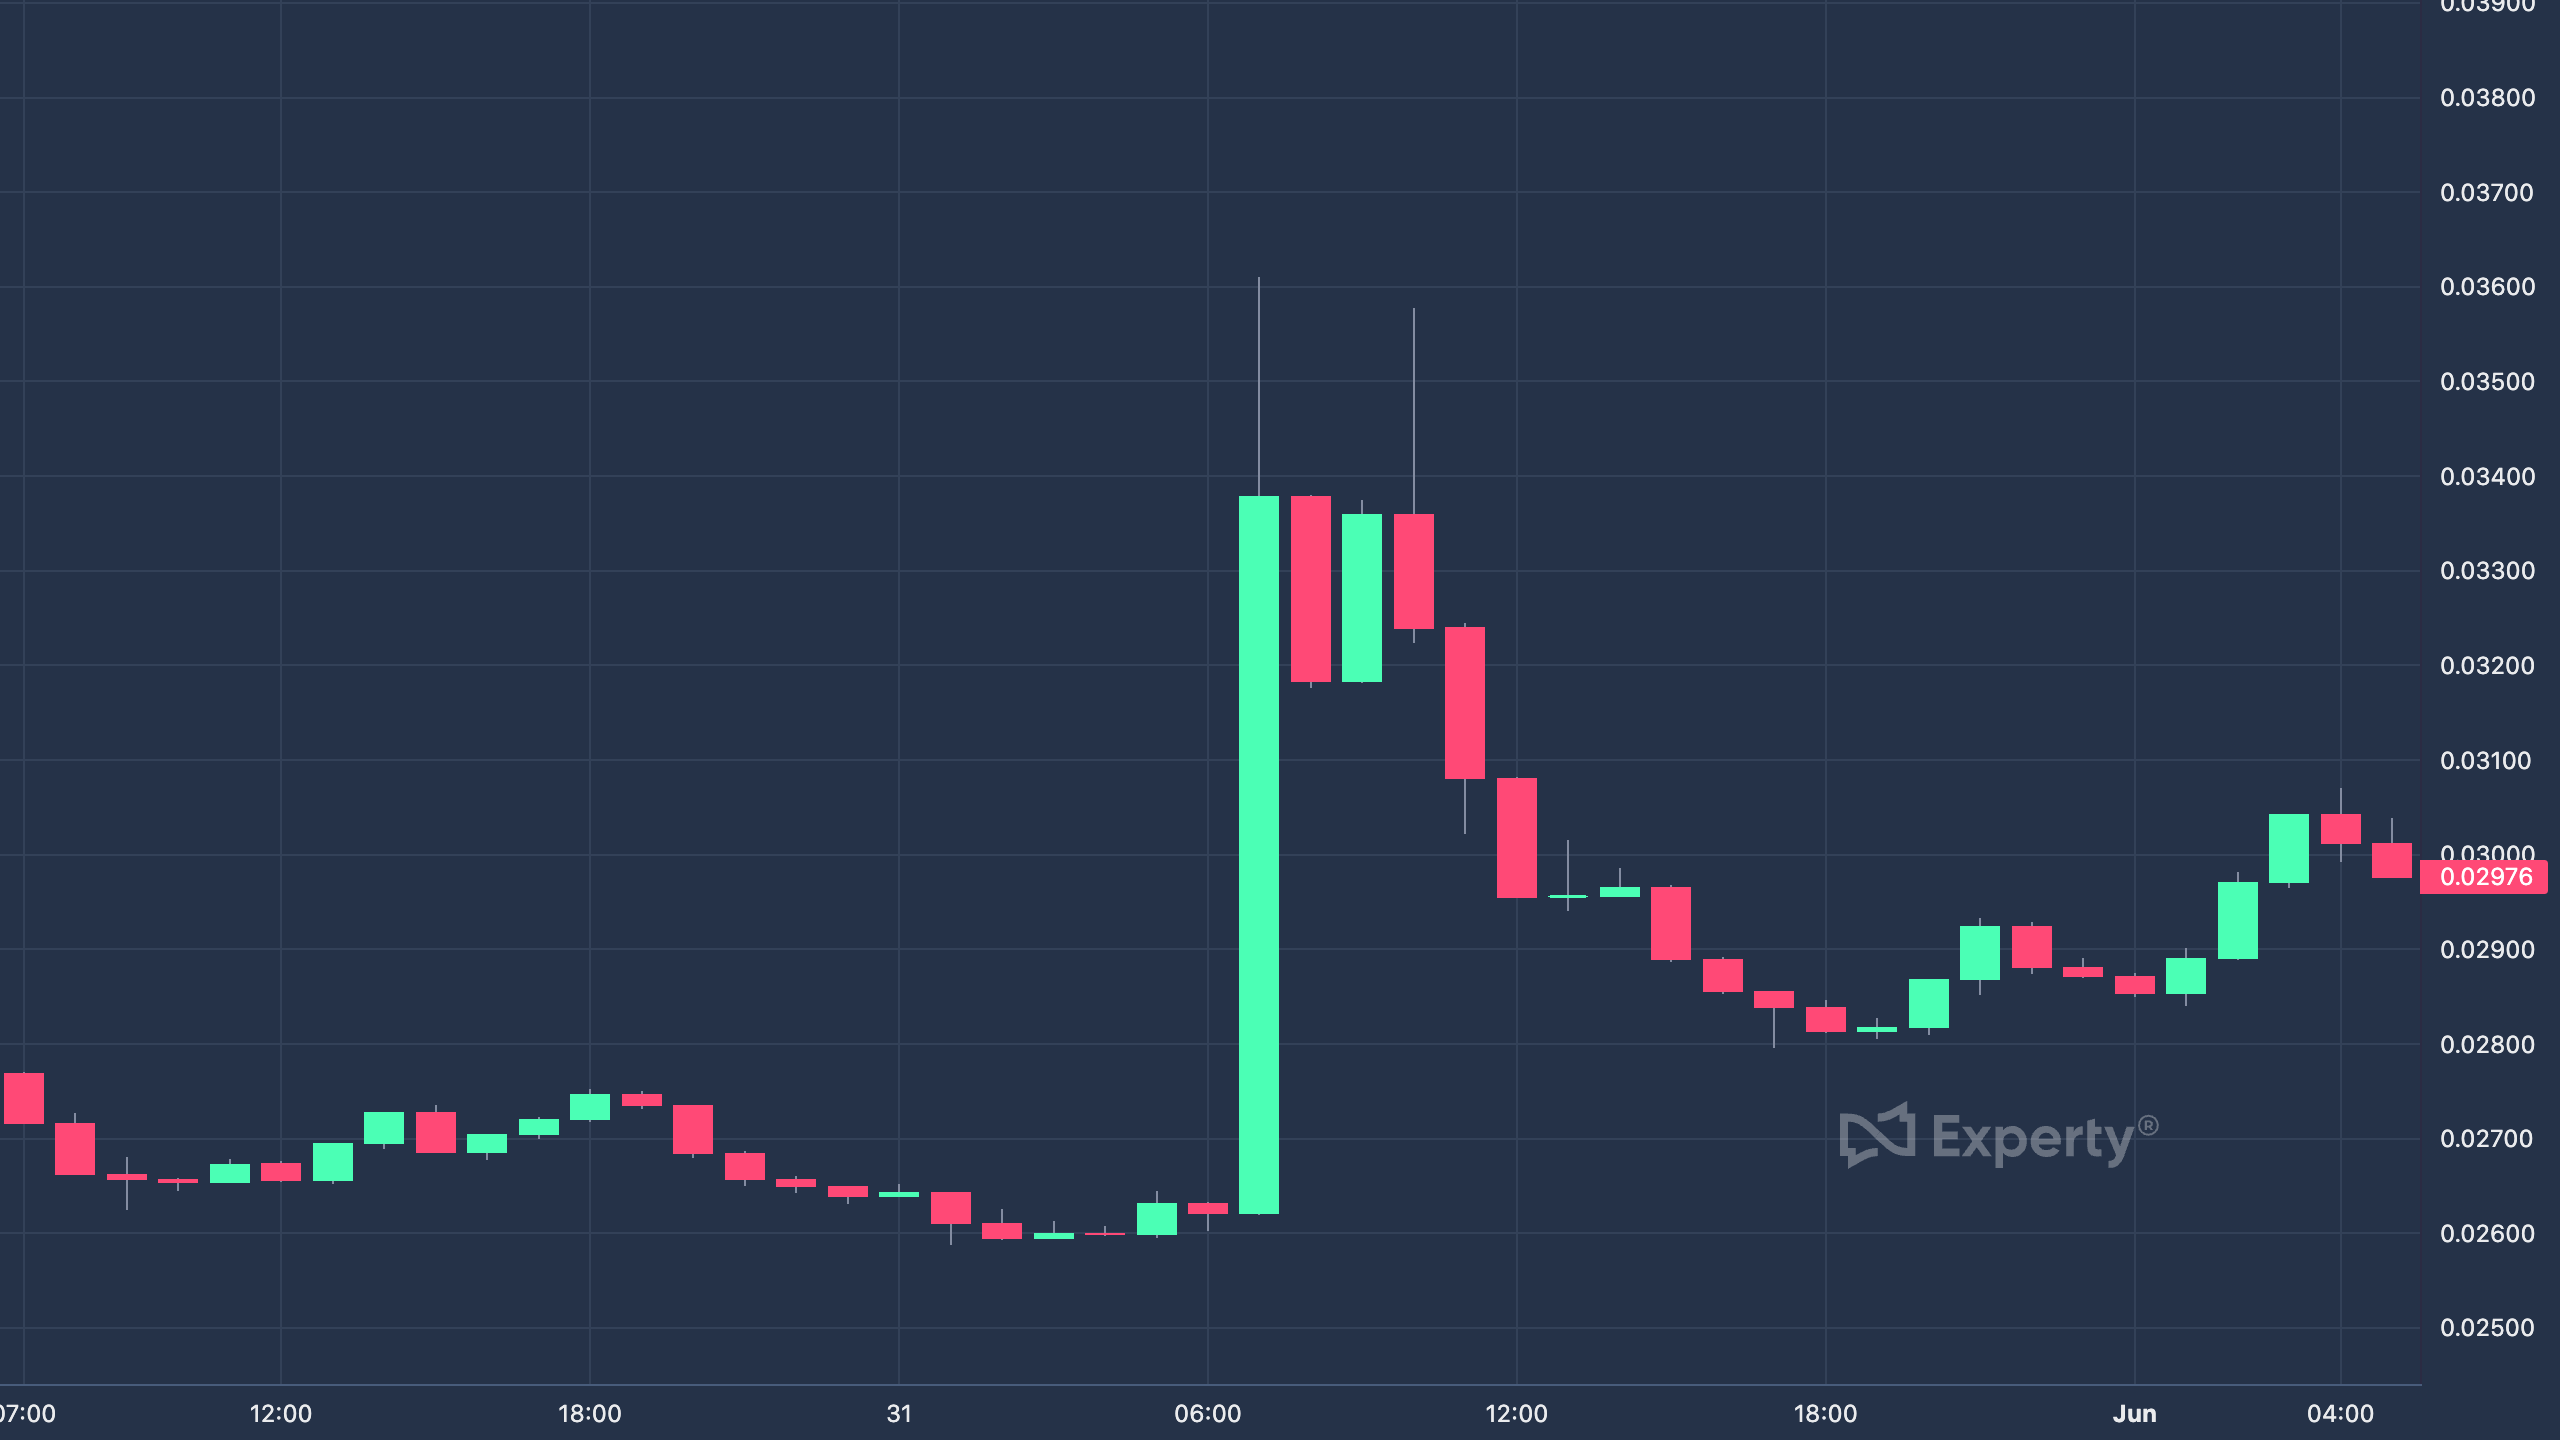 Chart of a breakout coin price